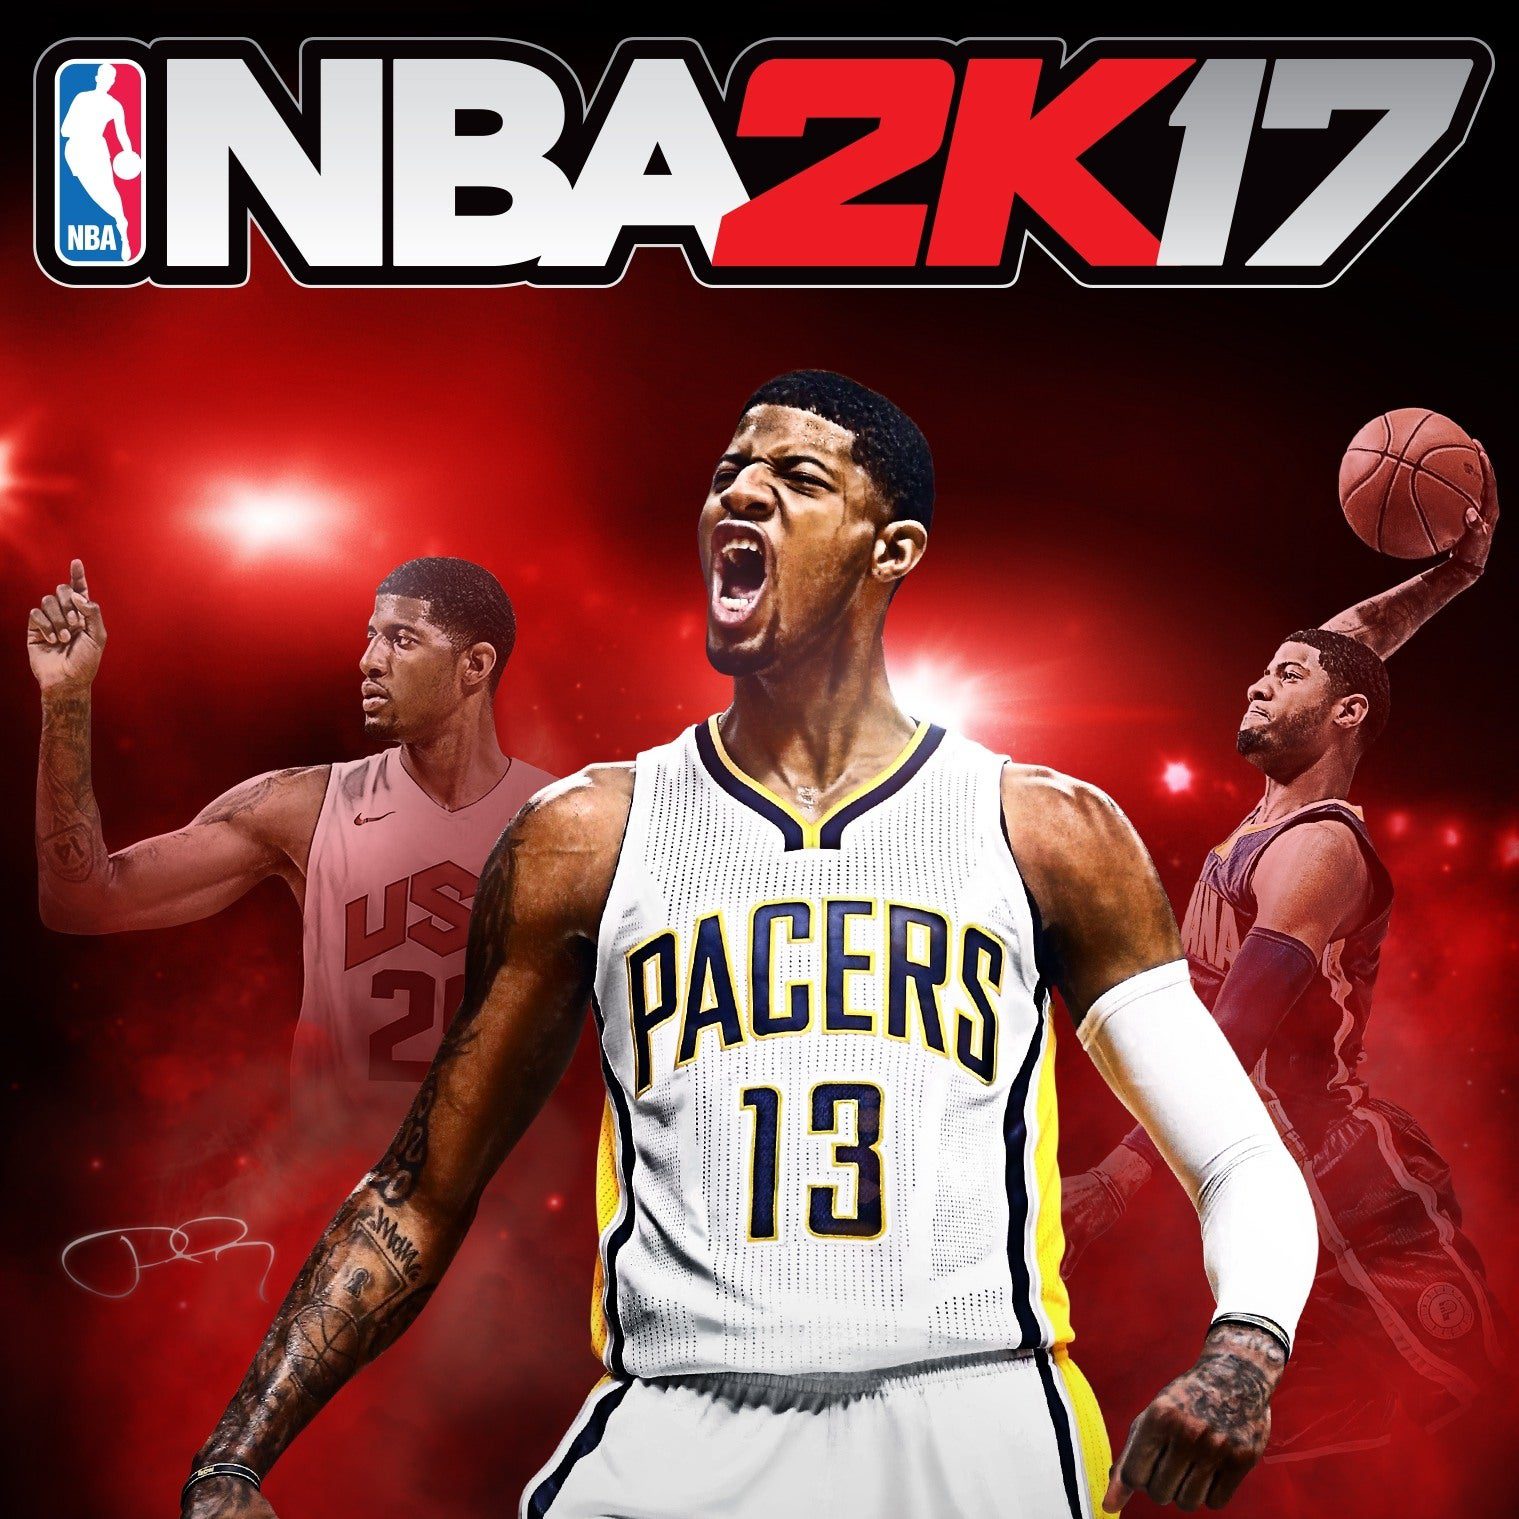 Download NBA 2K17 Game For PC